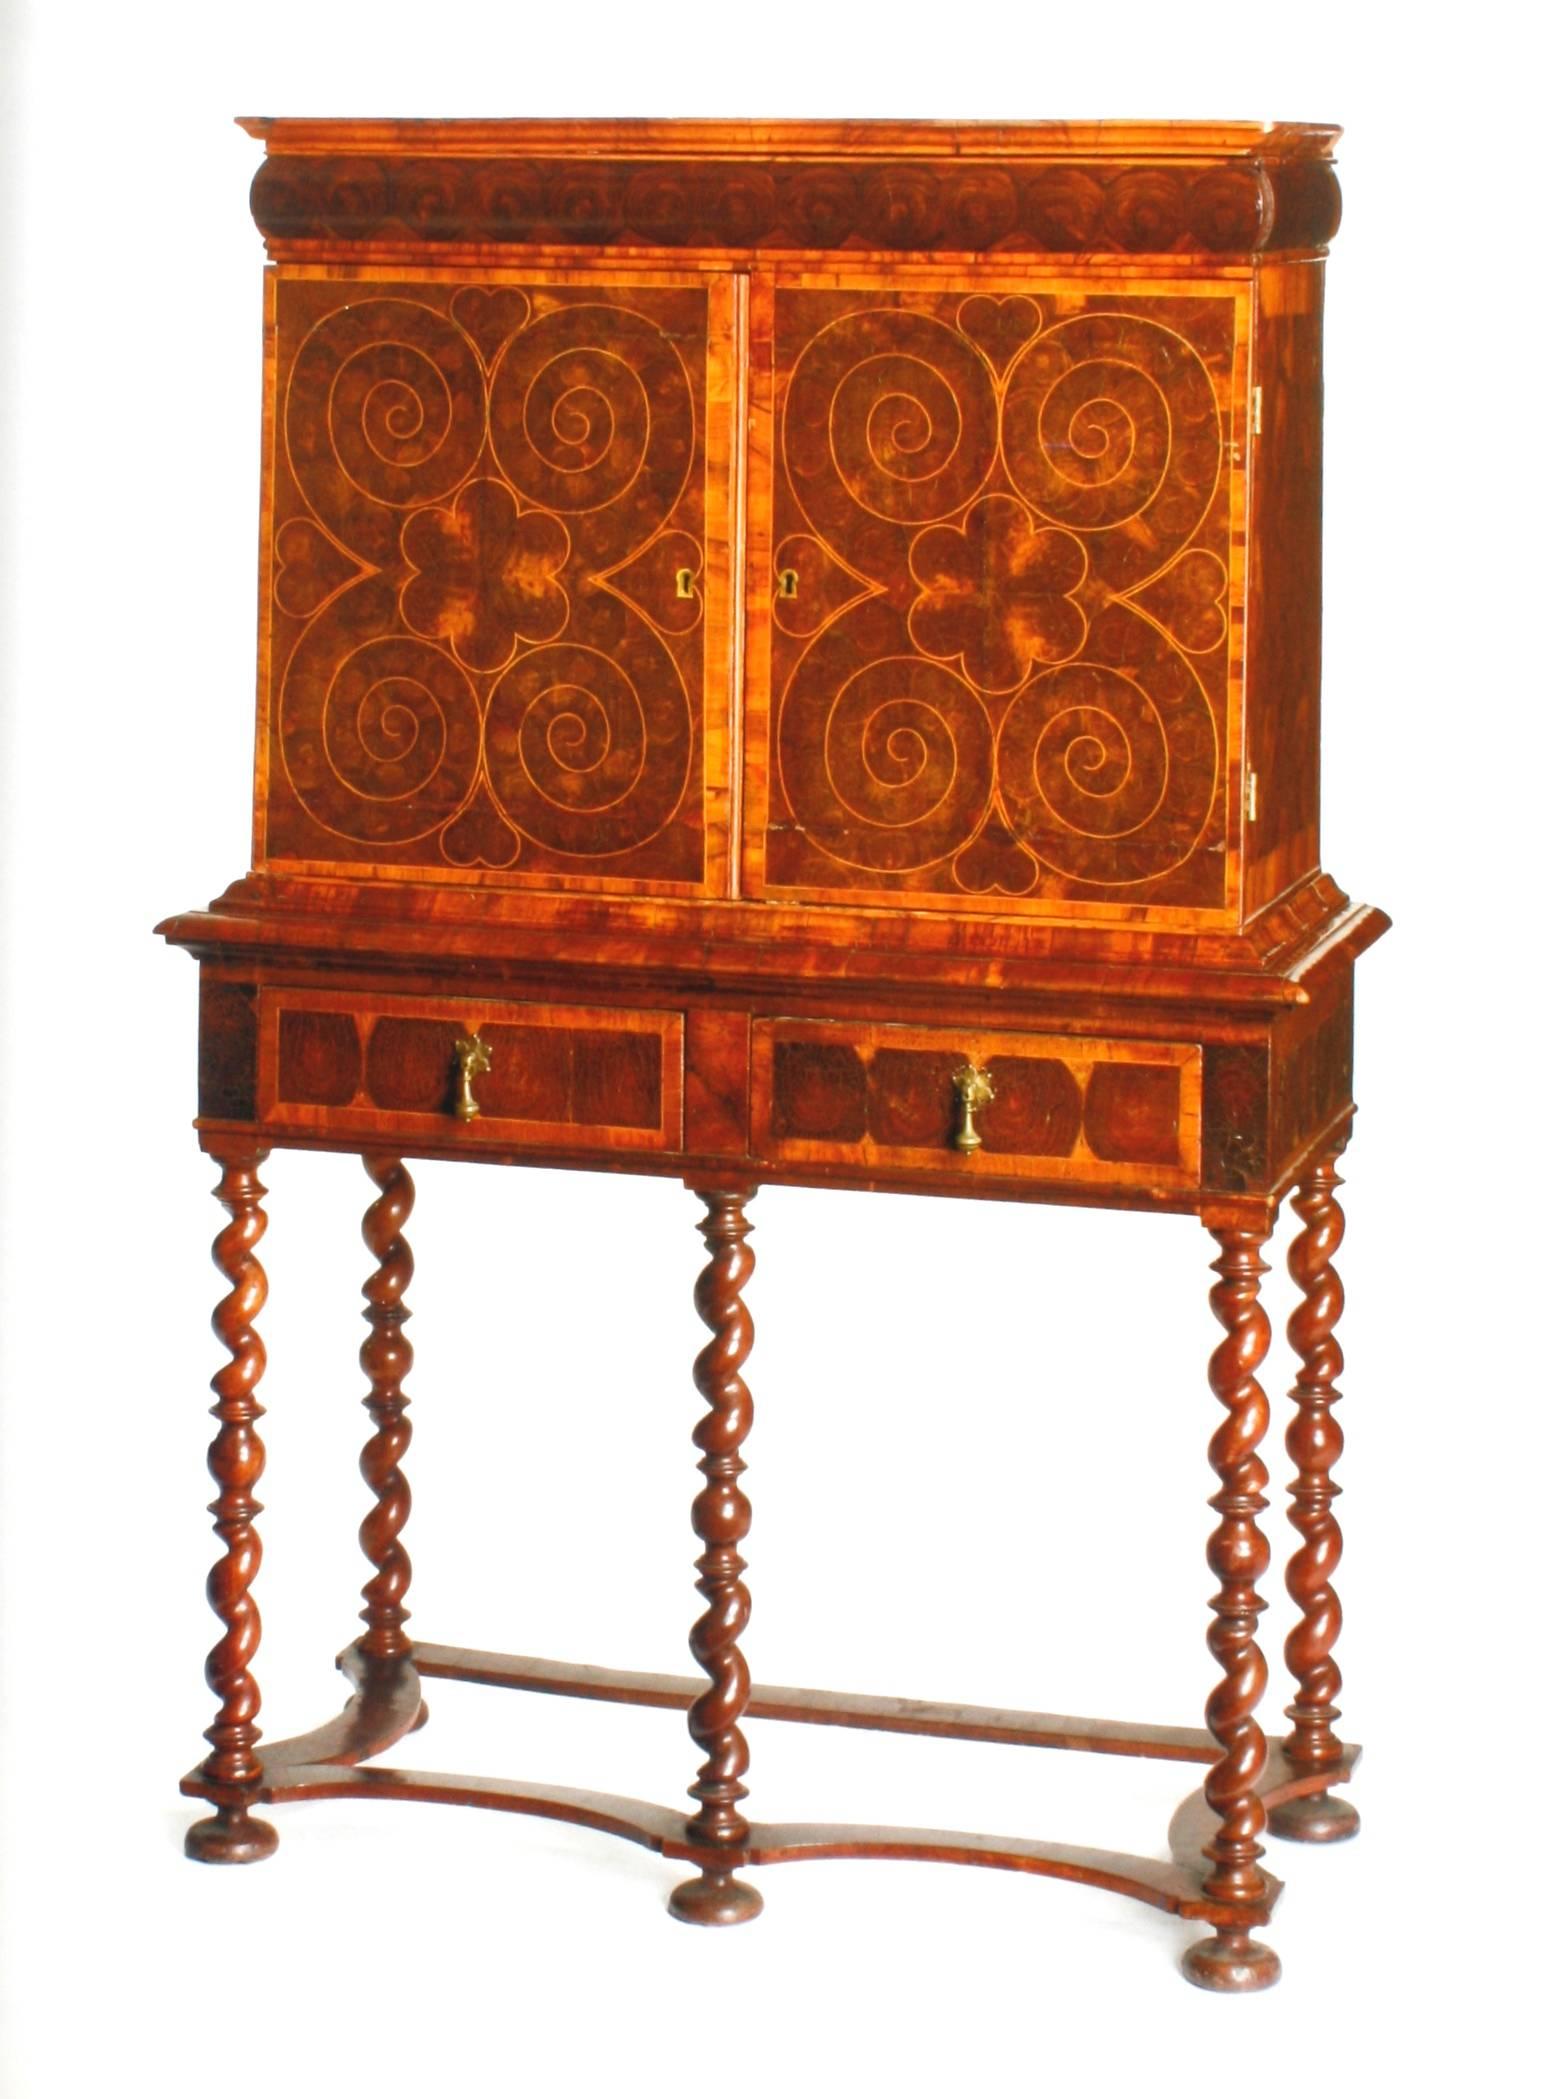 American Sotheby's, Tom Devenish Collection of Important English Furniture, 2008 For Sale